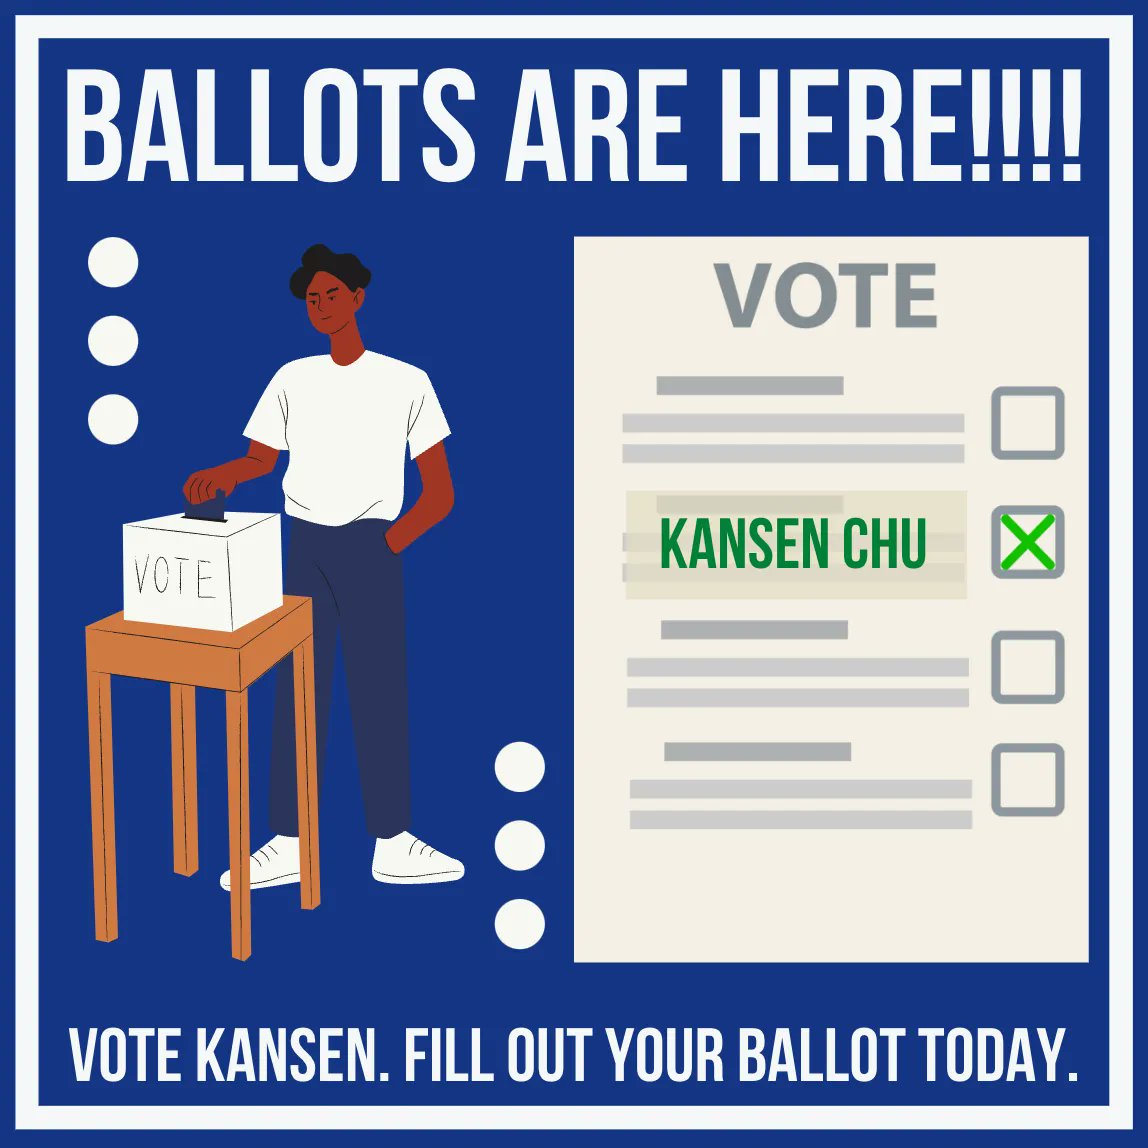 Fill out your ballot today to ensure that you have an experienced Assembly Representative with practical solutions that gets things done. Still have questions? Come meet me in person or visit kansenchu.com